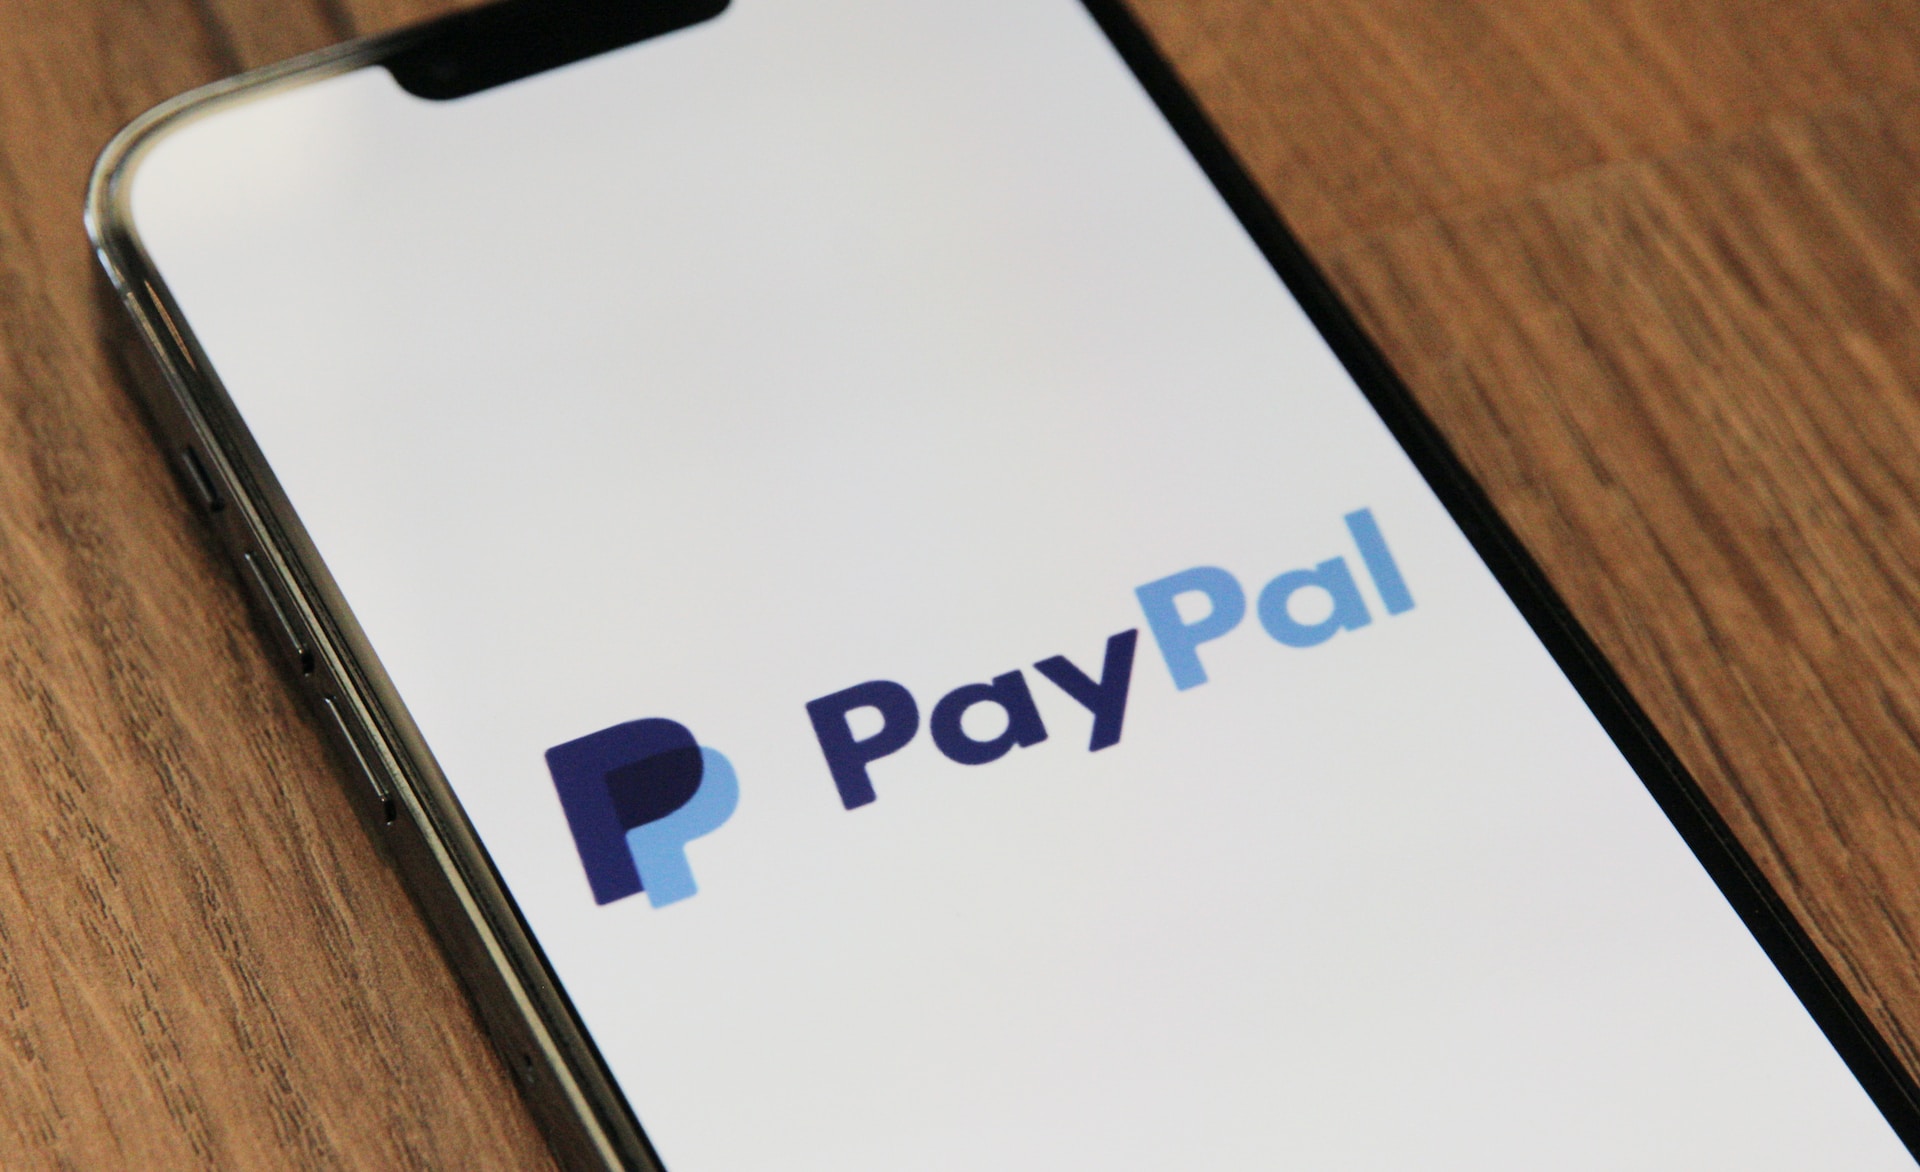 Ontario Online Casino Payment method - PayPal Logo on Mobile Phone - Photo by Marques Thomas on Unsplash - MGJ